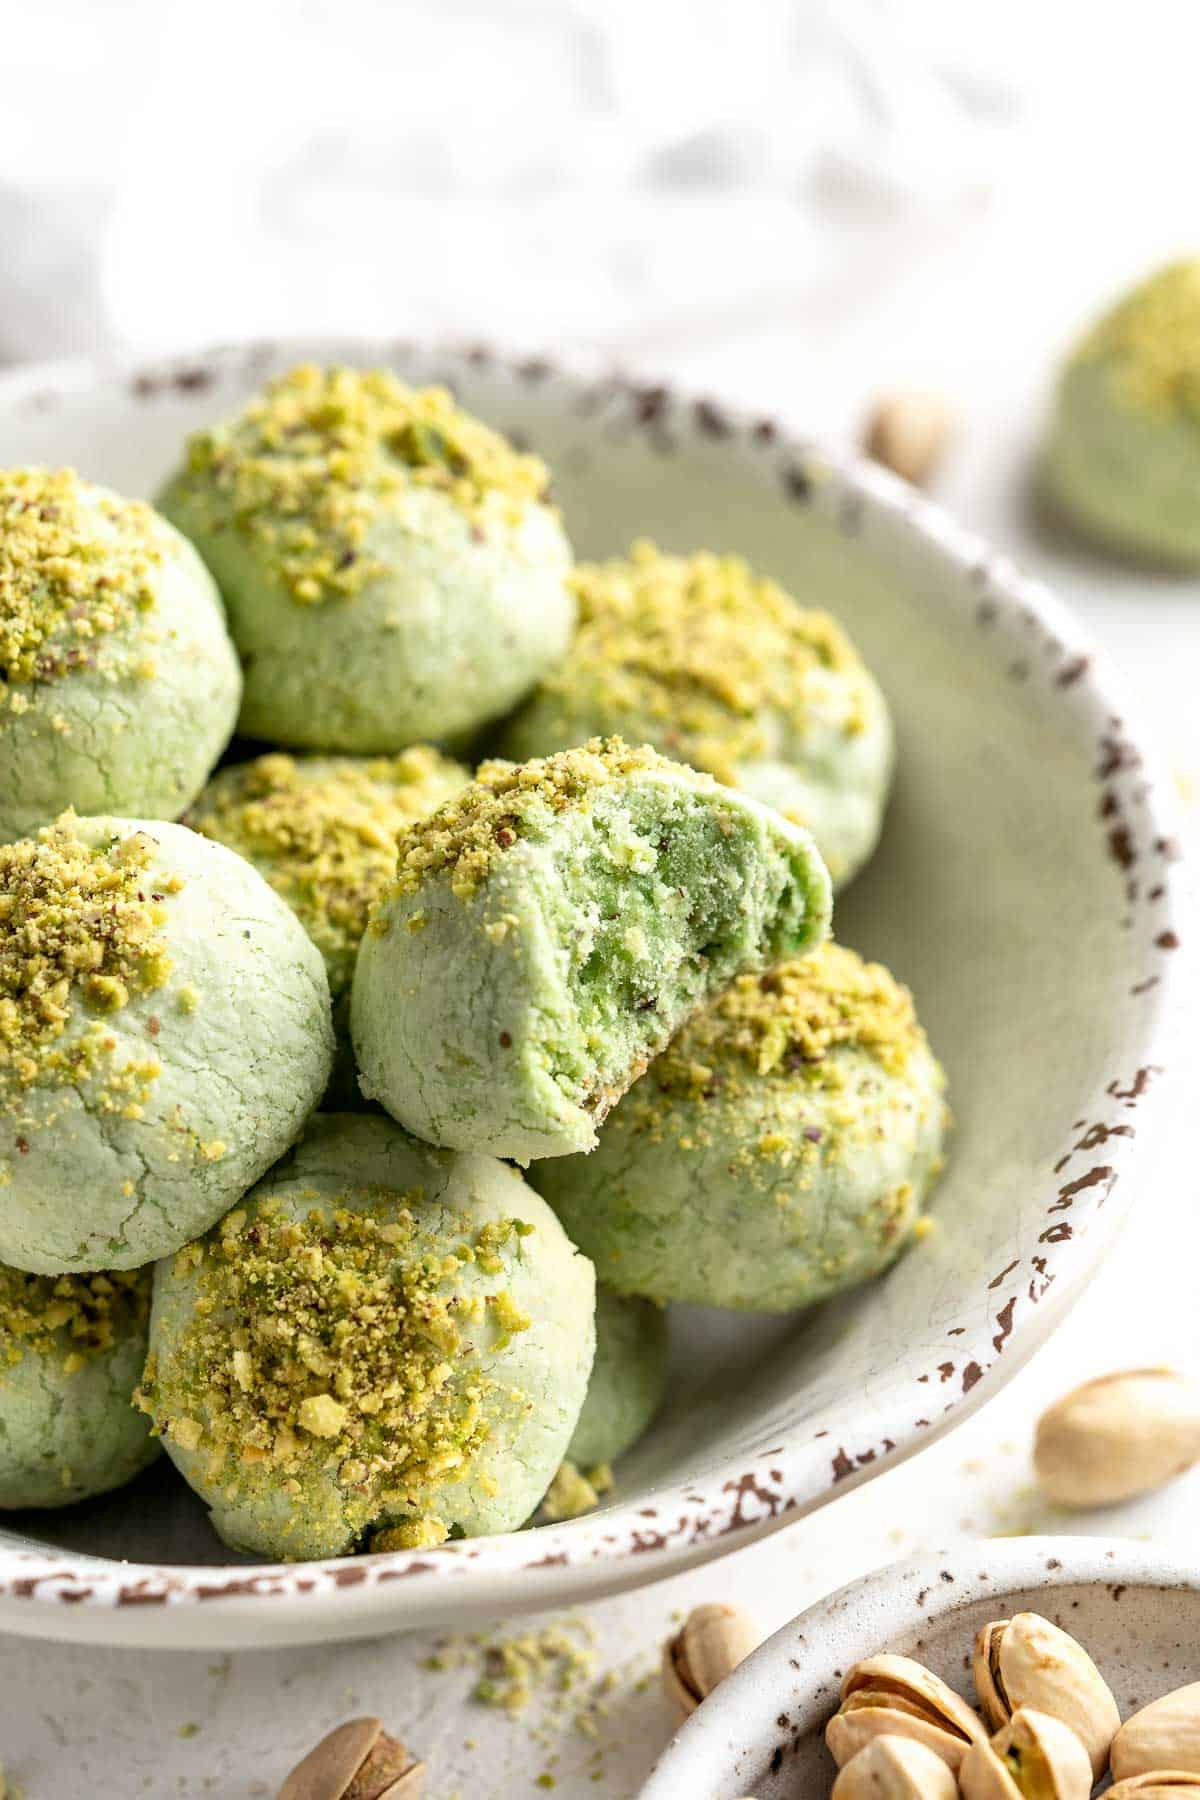 Pistachio Cookies are the perfect little bites, made with real ground pistachios suspended in a buttery, crumbly cookie dough, which melts in your mouth. | aheadofthyme.com